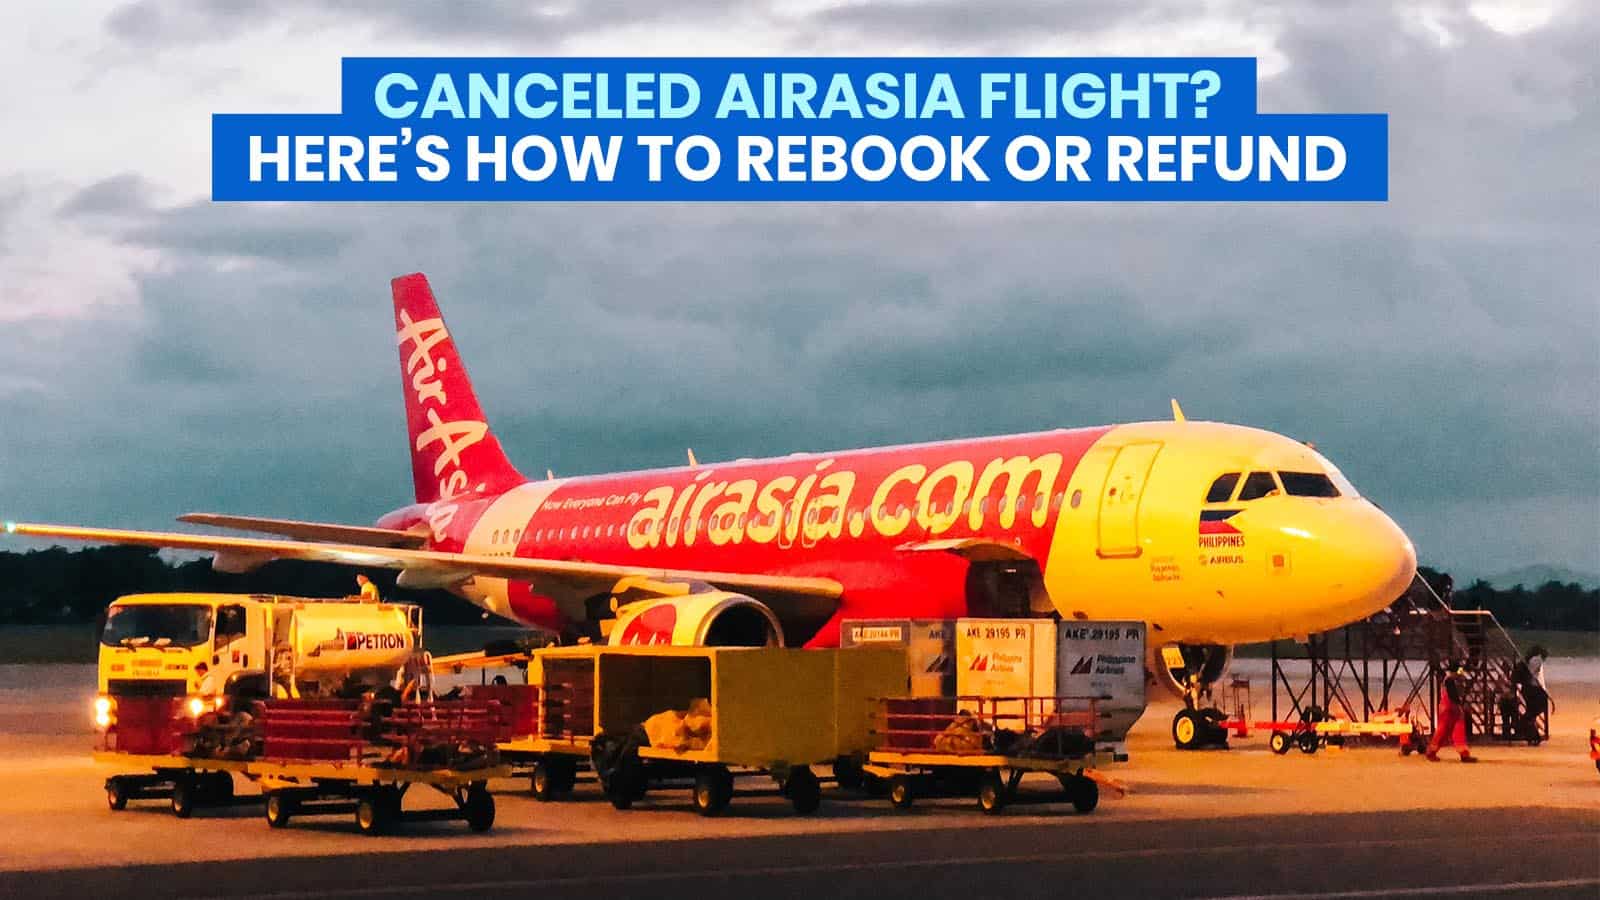 Canceled AIRASIA Flight due to COVID-19? Here’s How to REBOOK or REFUND!